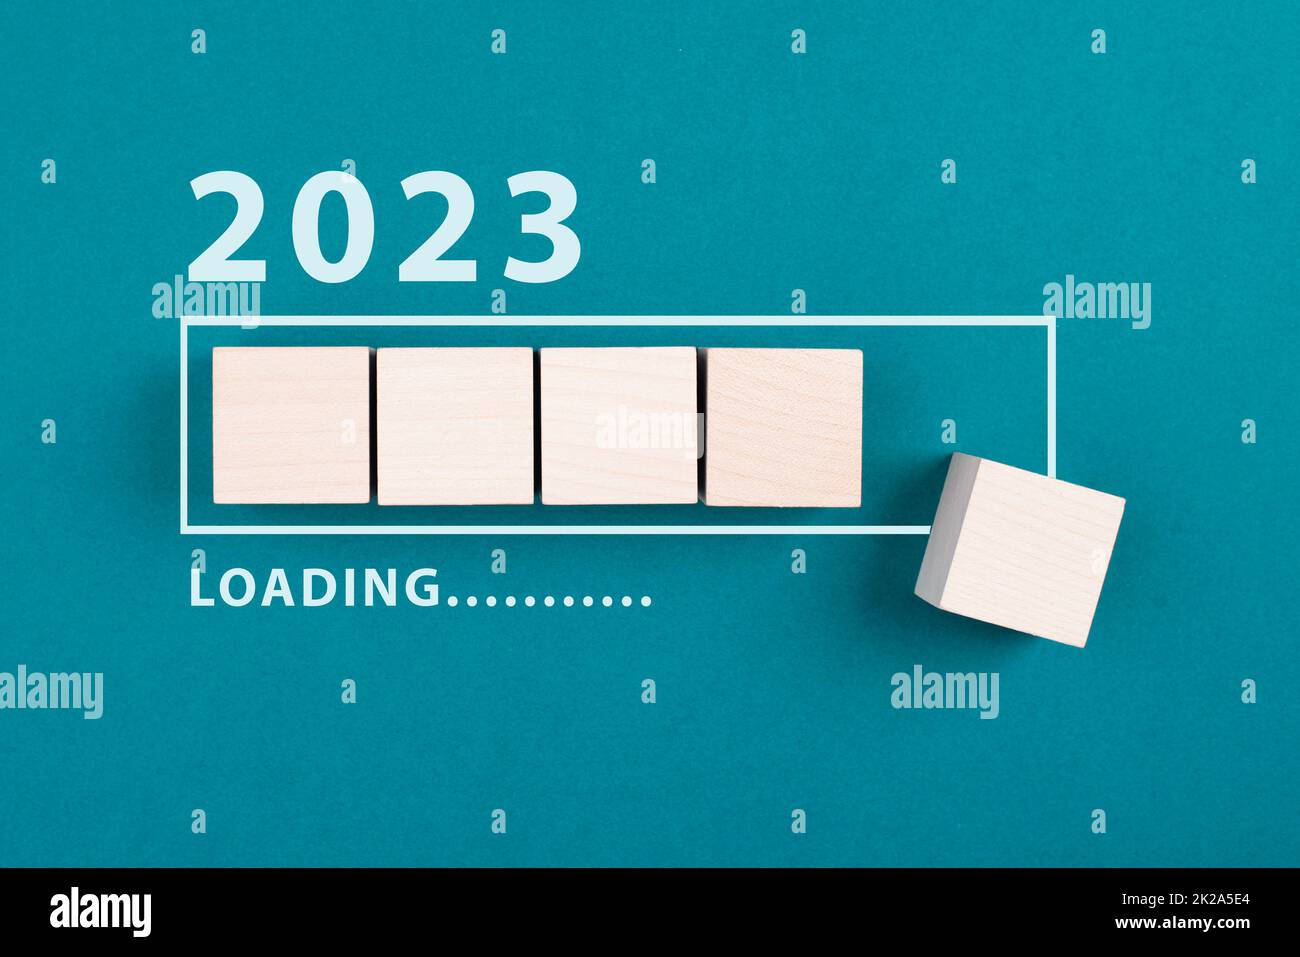 The new year 2023 is standing on a petrol colored background, loading bar with wooden cubes, calendar date Stock Photo